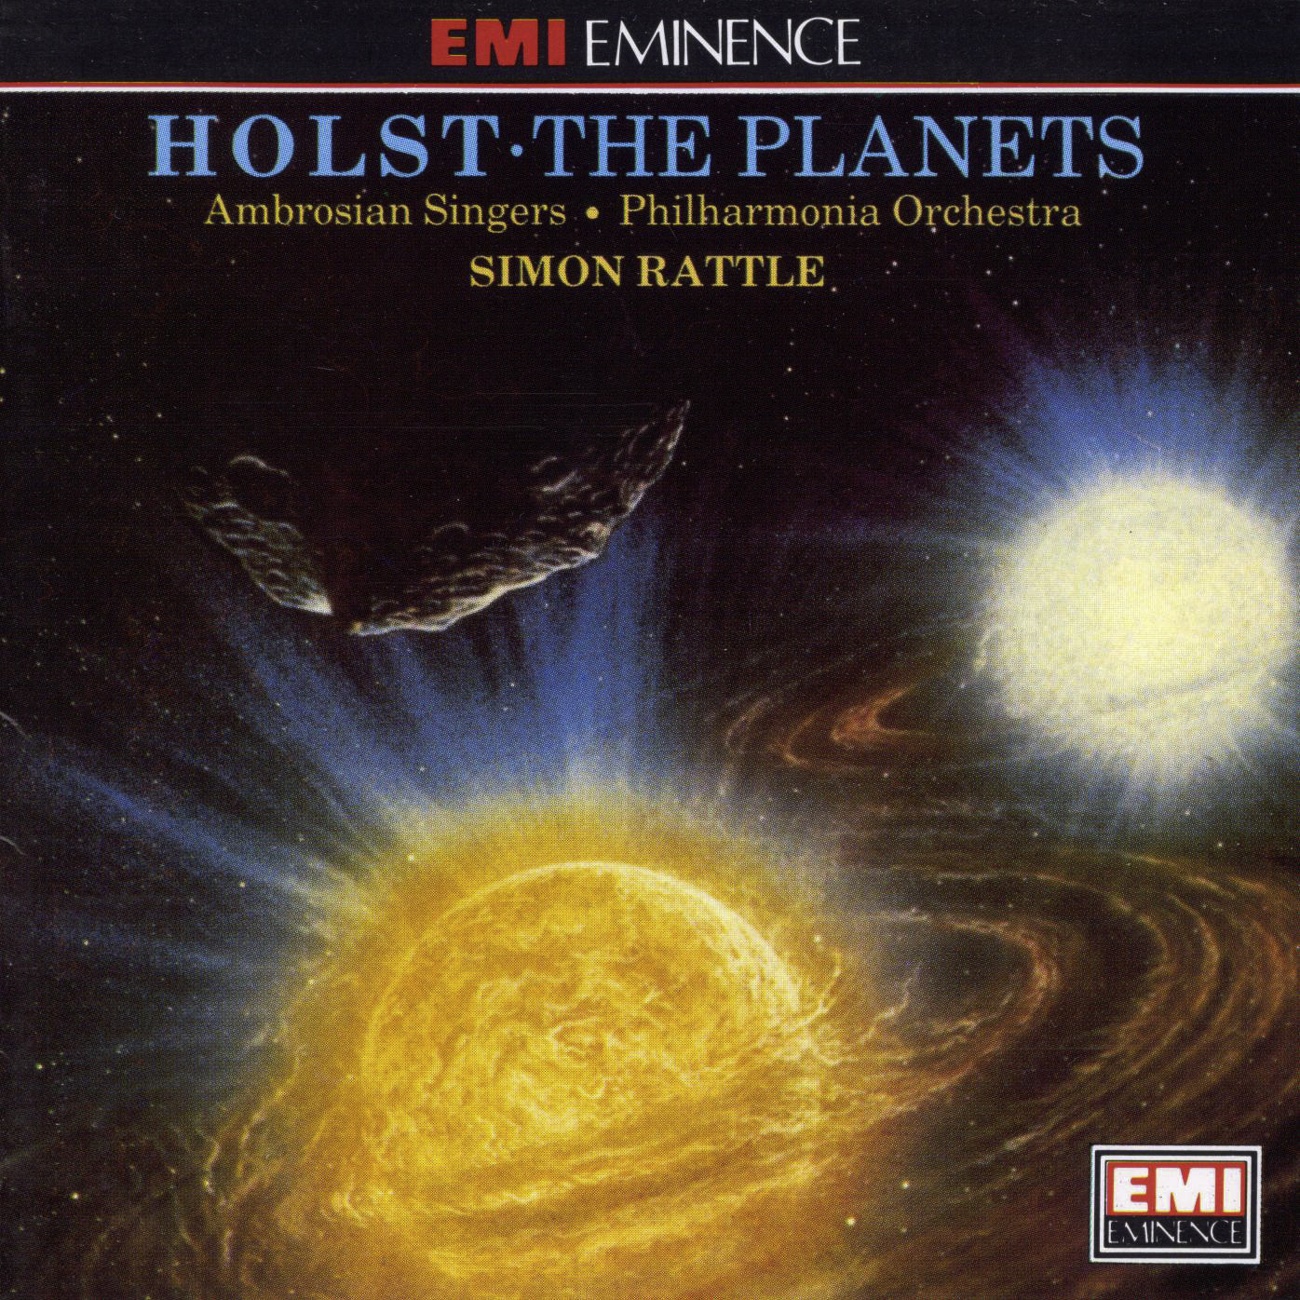 The Planets, Op. 32: 4. Jupiter, the Bringer of Jollity (Allegro giocoso)